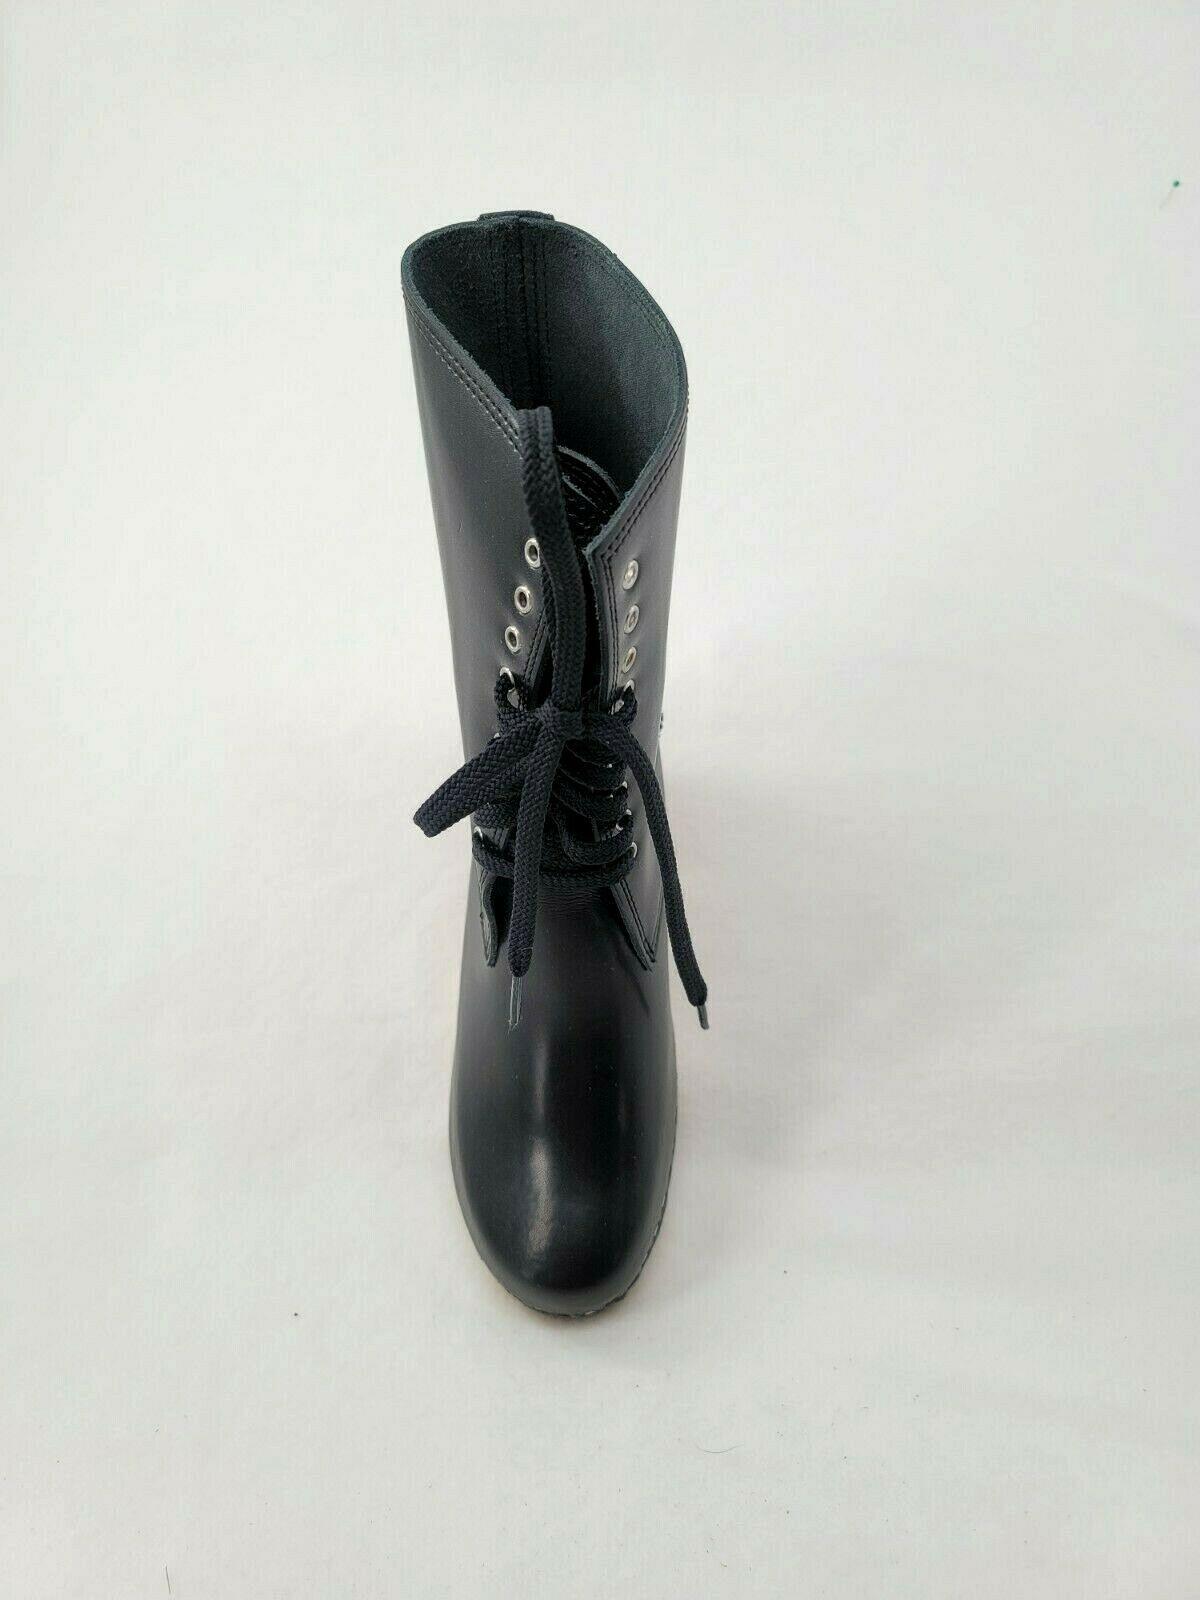 MAGUBA Sidney Clog Lace Up Leather Boots Womens Made in Sweden Black Size 40 - SVNYFancy